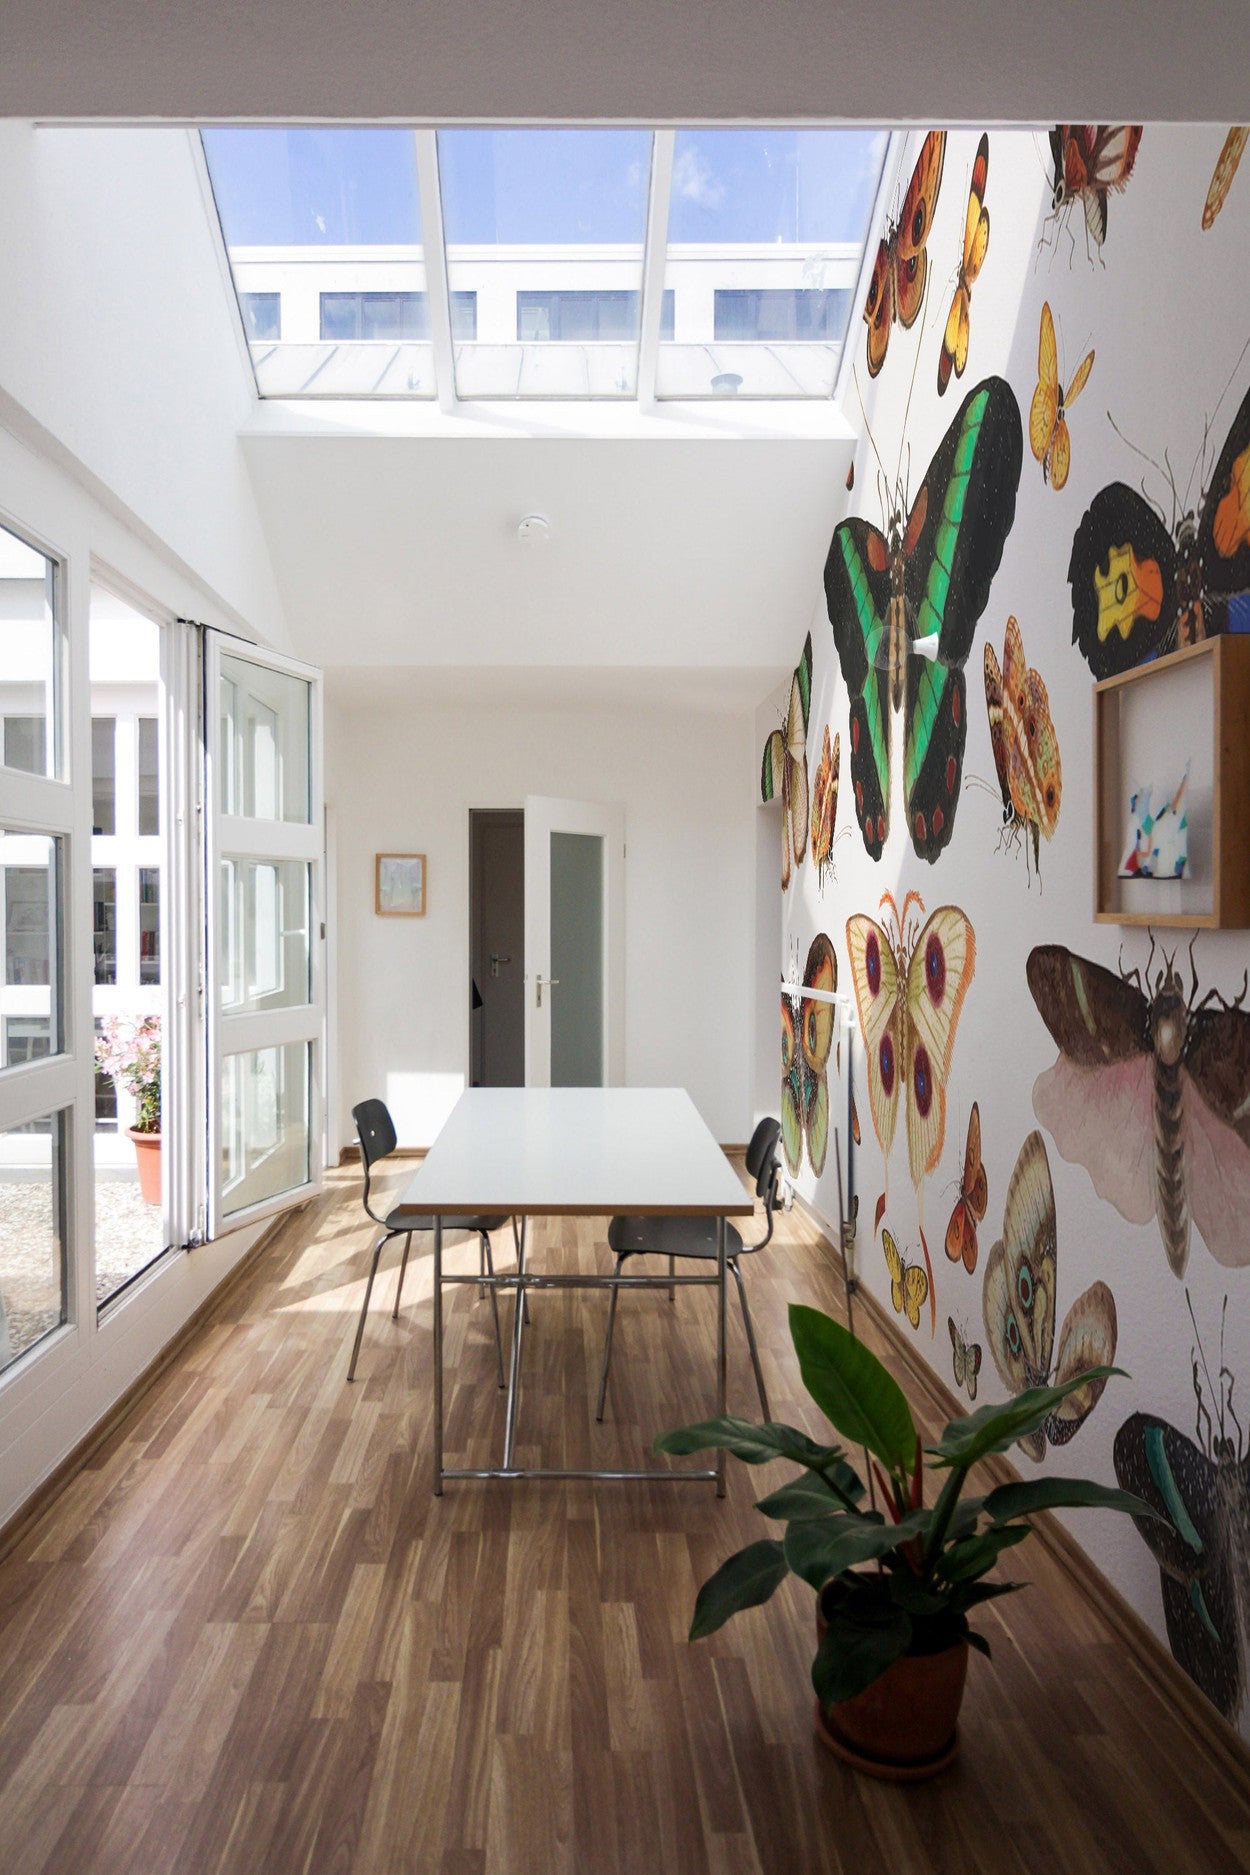 Bright room interior with large windows, skylight, and a wall mural featuring various butterflies